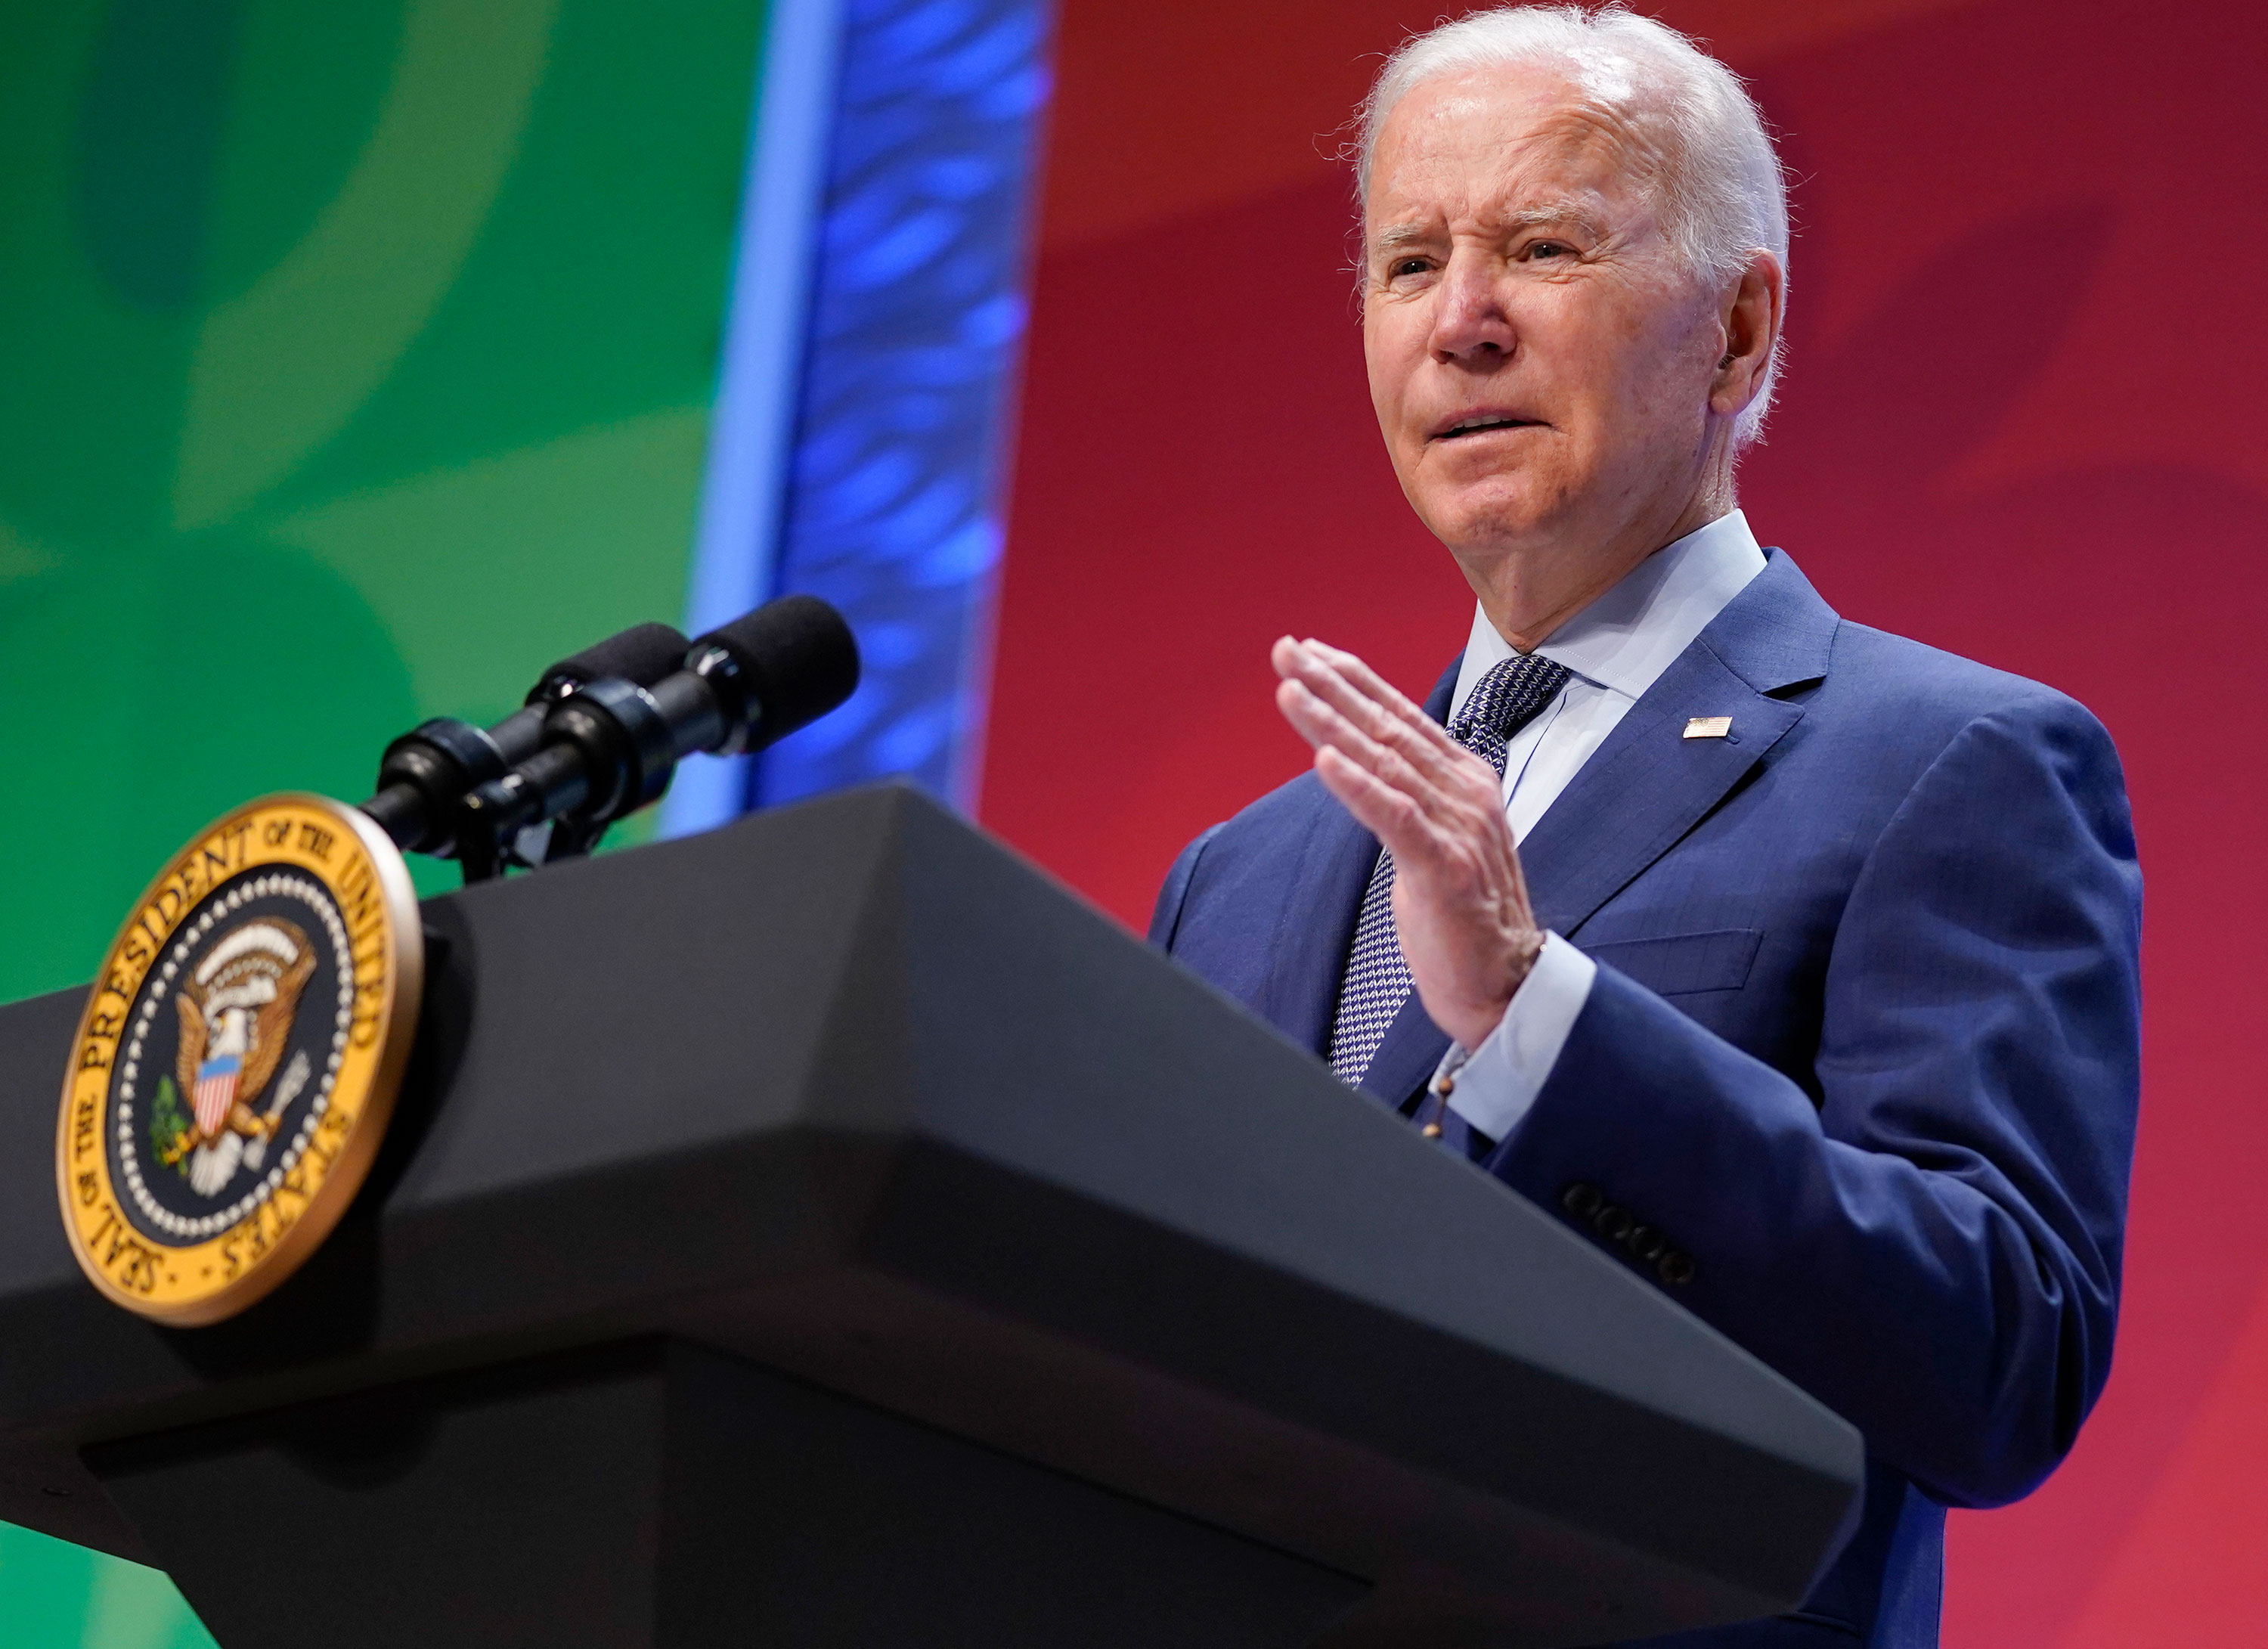 President Joe Biden speaks during the White House Conference on Hunger, Nutrition, and Health, at the Ronald Reagan Building in Washington, DC, on Wednesday.